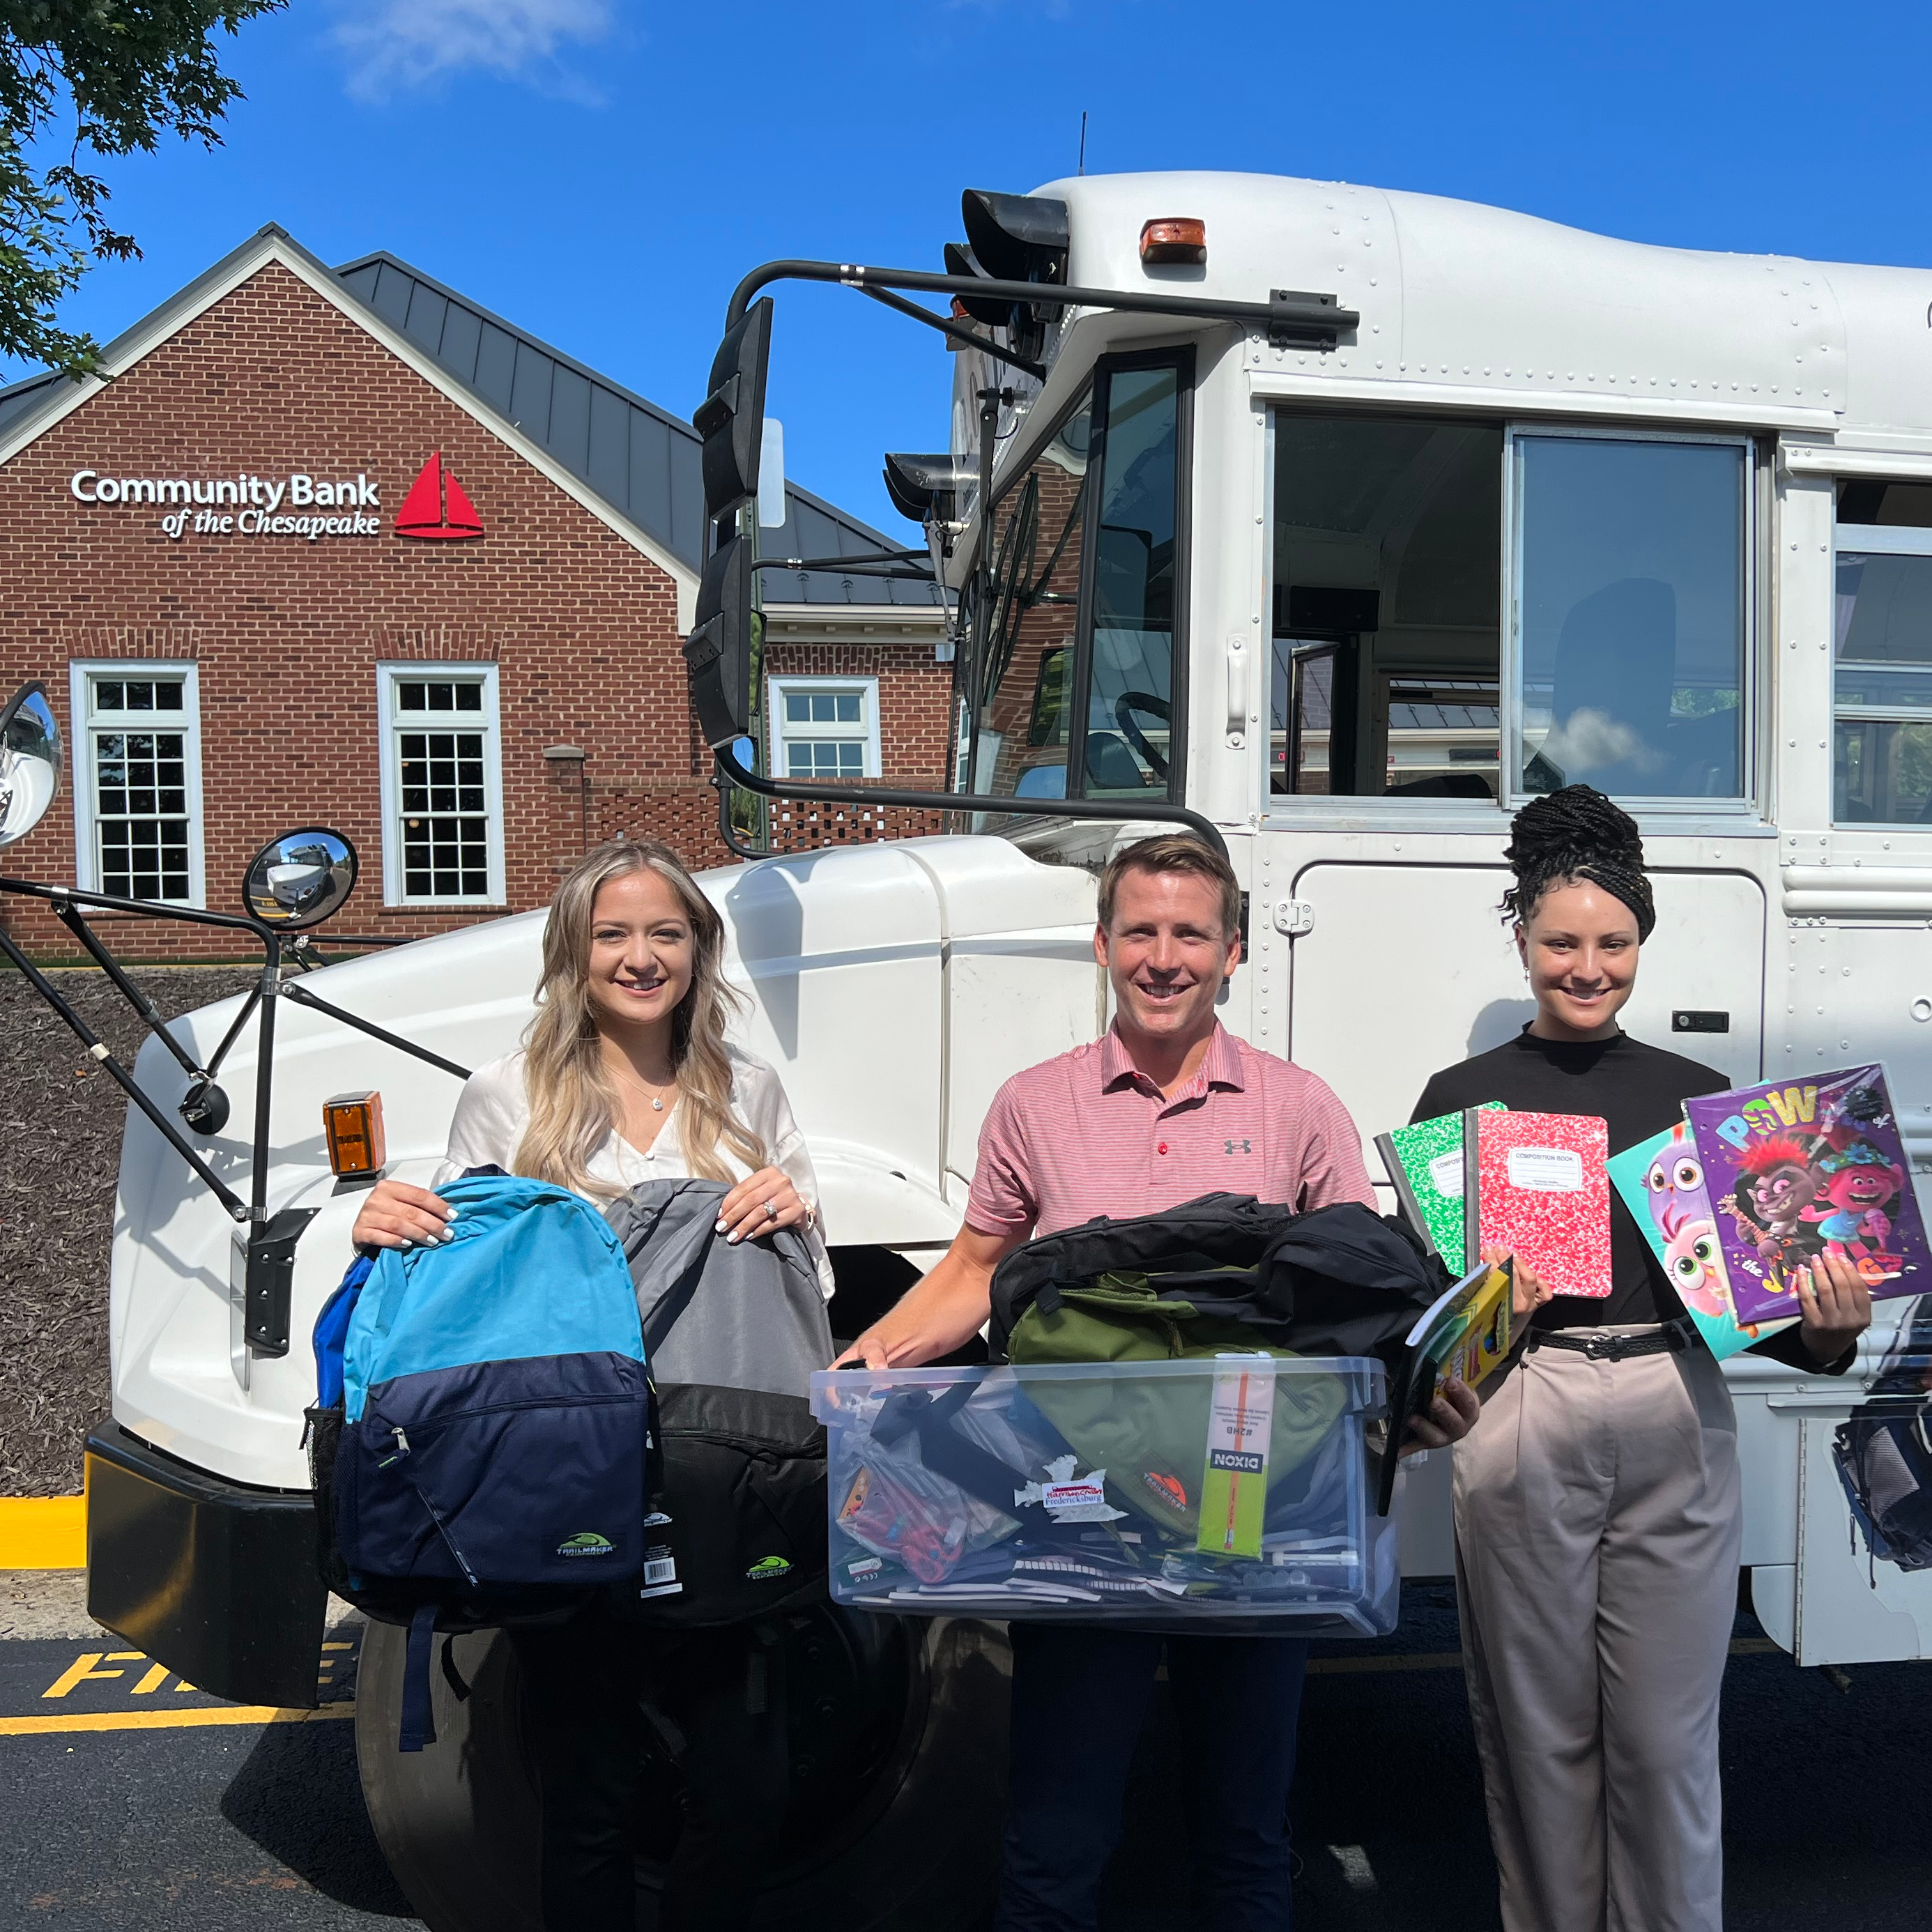 A group of people smiling and holding up school supplies in front of the white rover school bus. They are from the community bank of the chesapeake.